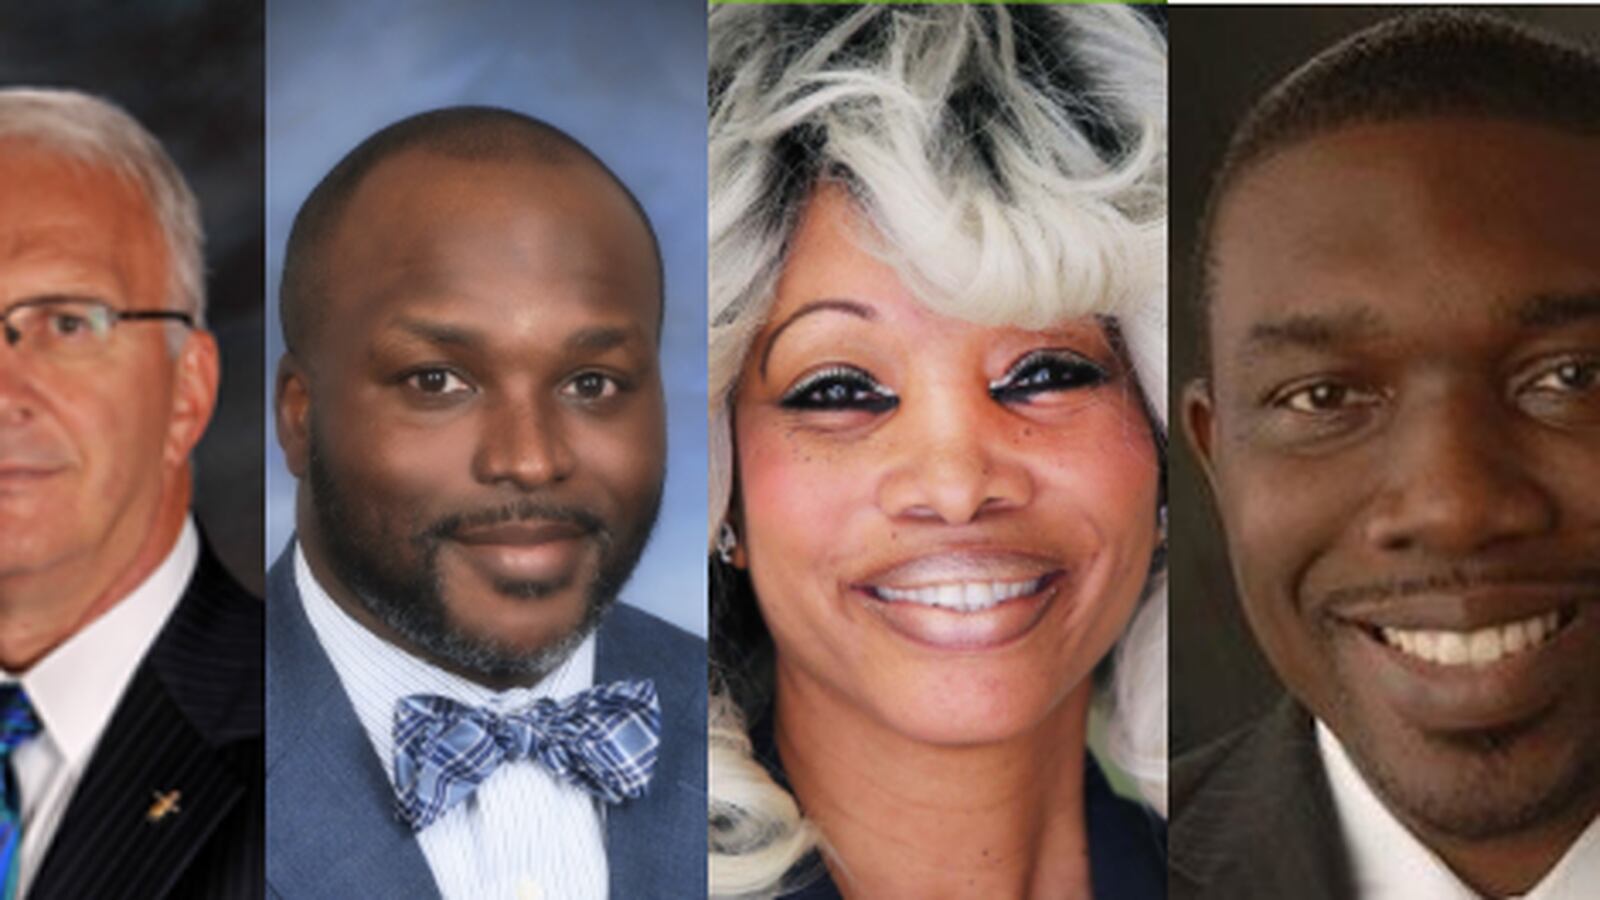 Hires from Tennessee superintendent searches in recent years, from left: Bob Thomas, Knox County Schools; Bryan Johnson, Hamilton County Schools; Sharon Griffin, Achievement School District; Shawn Joseph, Metro Nashville Public Schools.